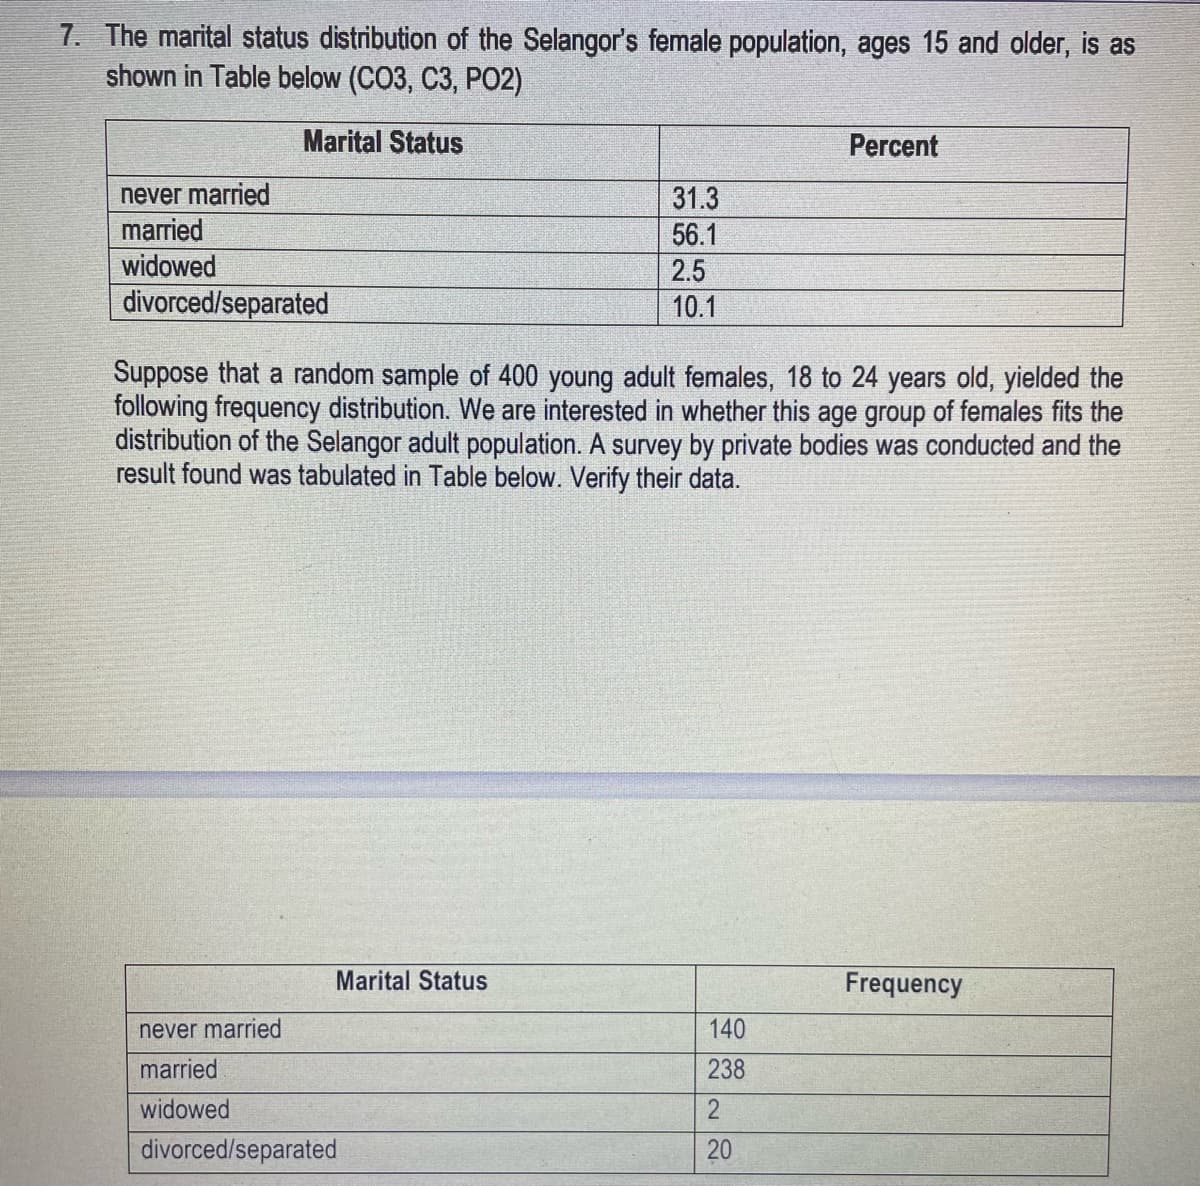 7. The marital status distribution of the Selangor's female population, ages 15 and older, is as
shown in Table below (CO3, C3, PO2)
Marital Status
Percent
never married
married
31.3
56.1
widowed
2.5
divorced/separated
10.1
Suppose that a random sample of 400 young adult females, 18 to 24 years old, yielded the
following frequency distribution. We are interested in whether this age group of females fits the
distribution of the Selangor adult population. A survey by private bodies was conducted and the
result found was tabulated in Table below. Verify their data.
Marital Status
Frequency
never married
140
married
238
widowed
2
divorced/separated
20
